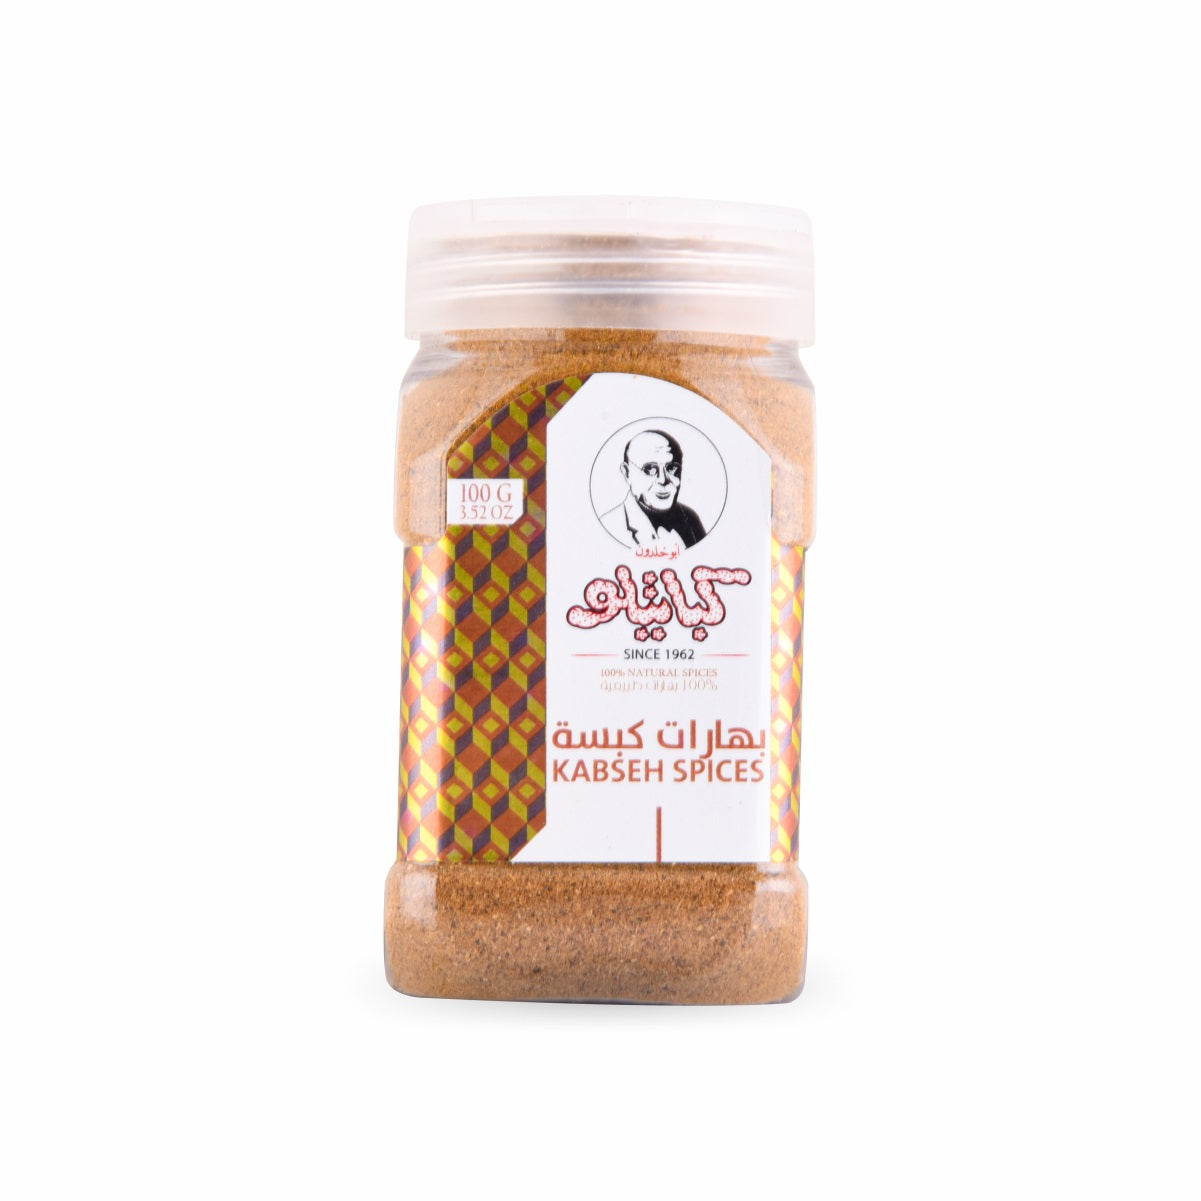 0Kabseh Spices Kabatilo 100g0